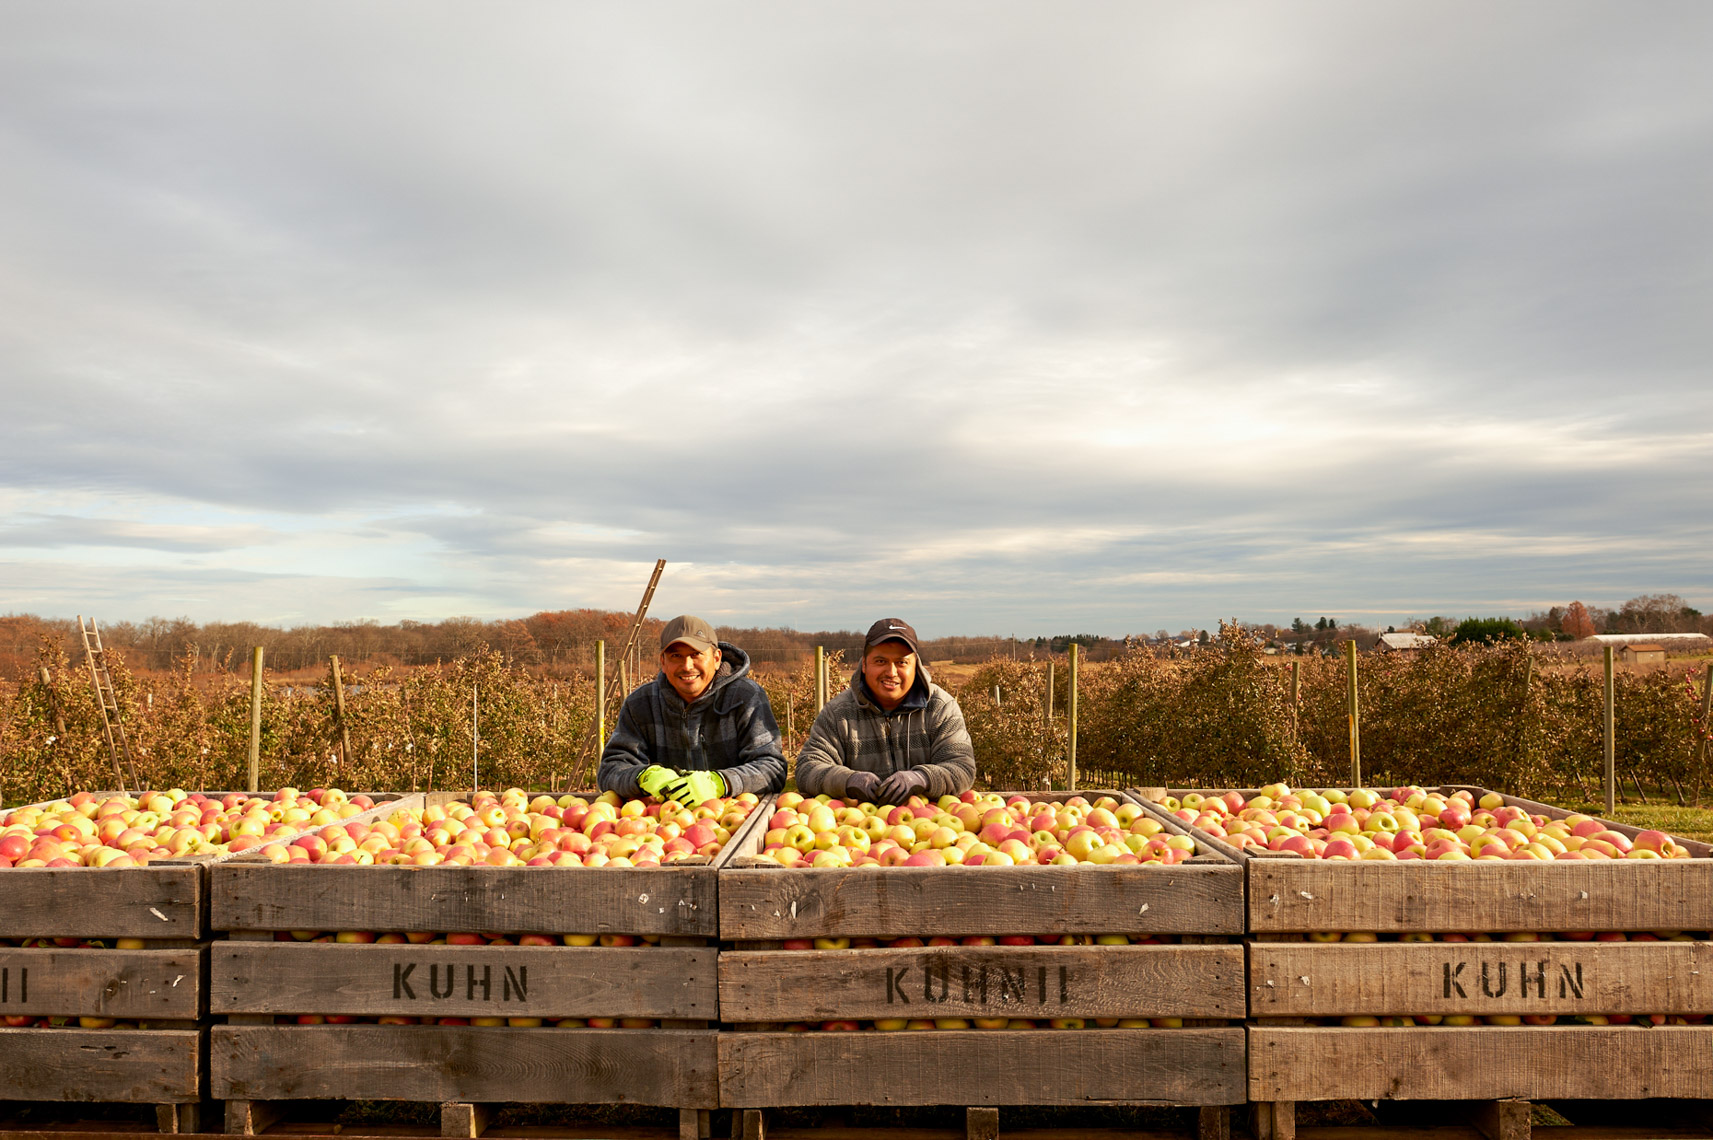 Kuhn Orchards
